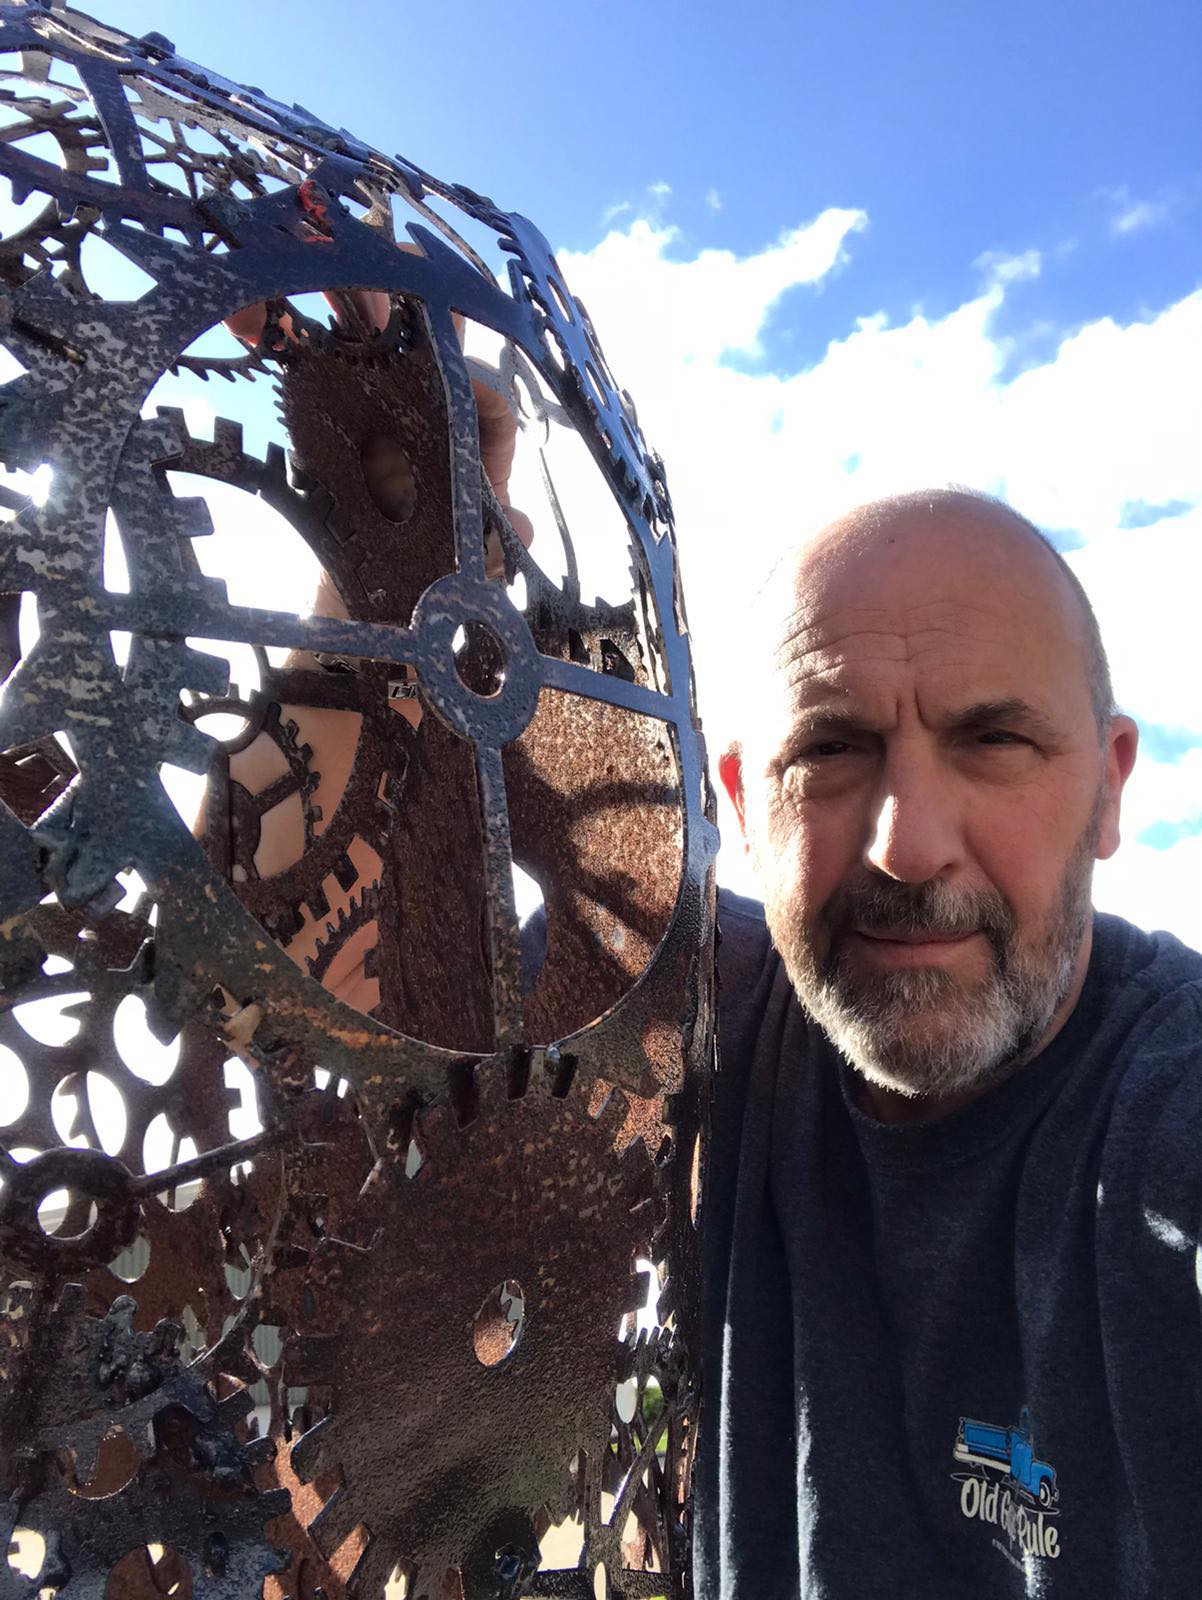 Kevin Baumber, one of the Artists for the St Barnabas HeART Trail. Man with beard posing with sculpture depicting industrial cogs made of metal.